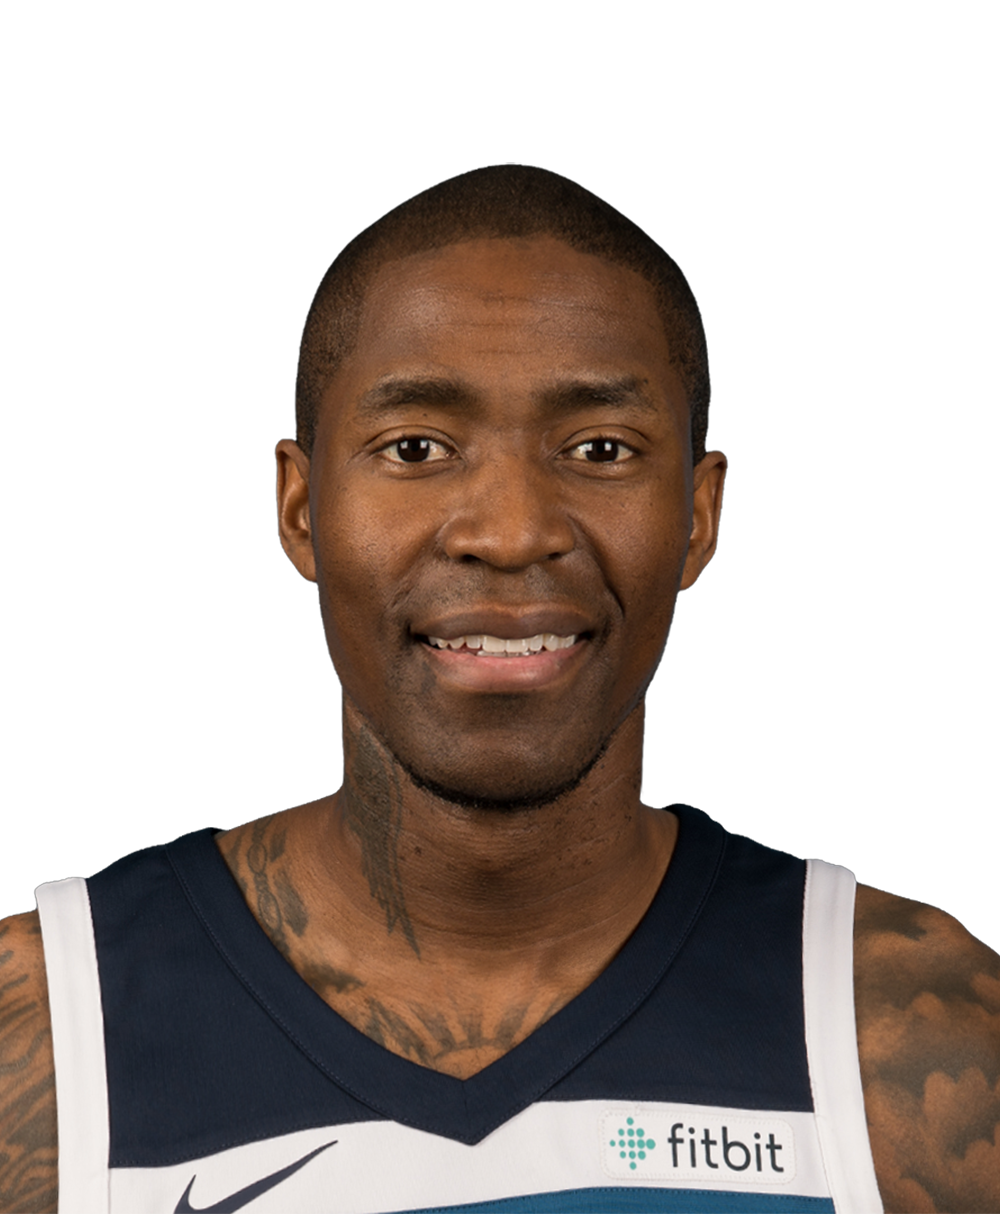 Report: Jamal Crawford to sign with Brooklyn Nets